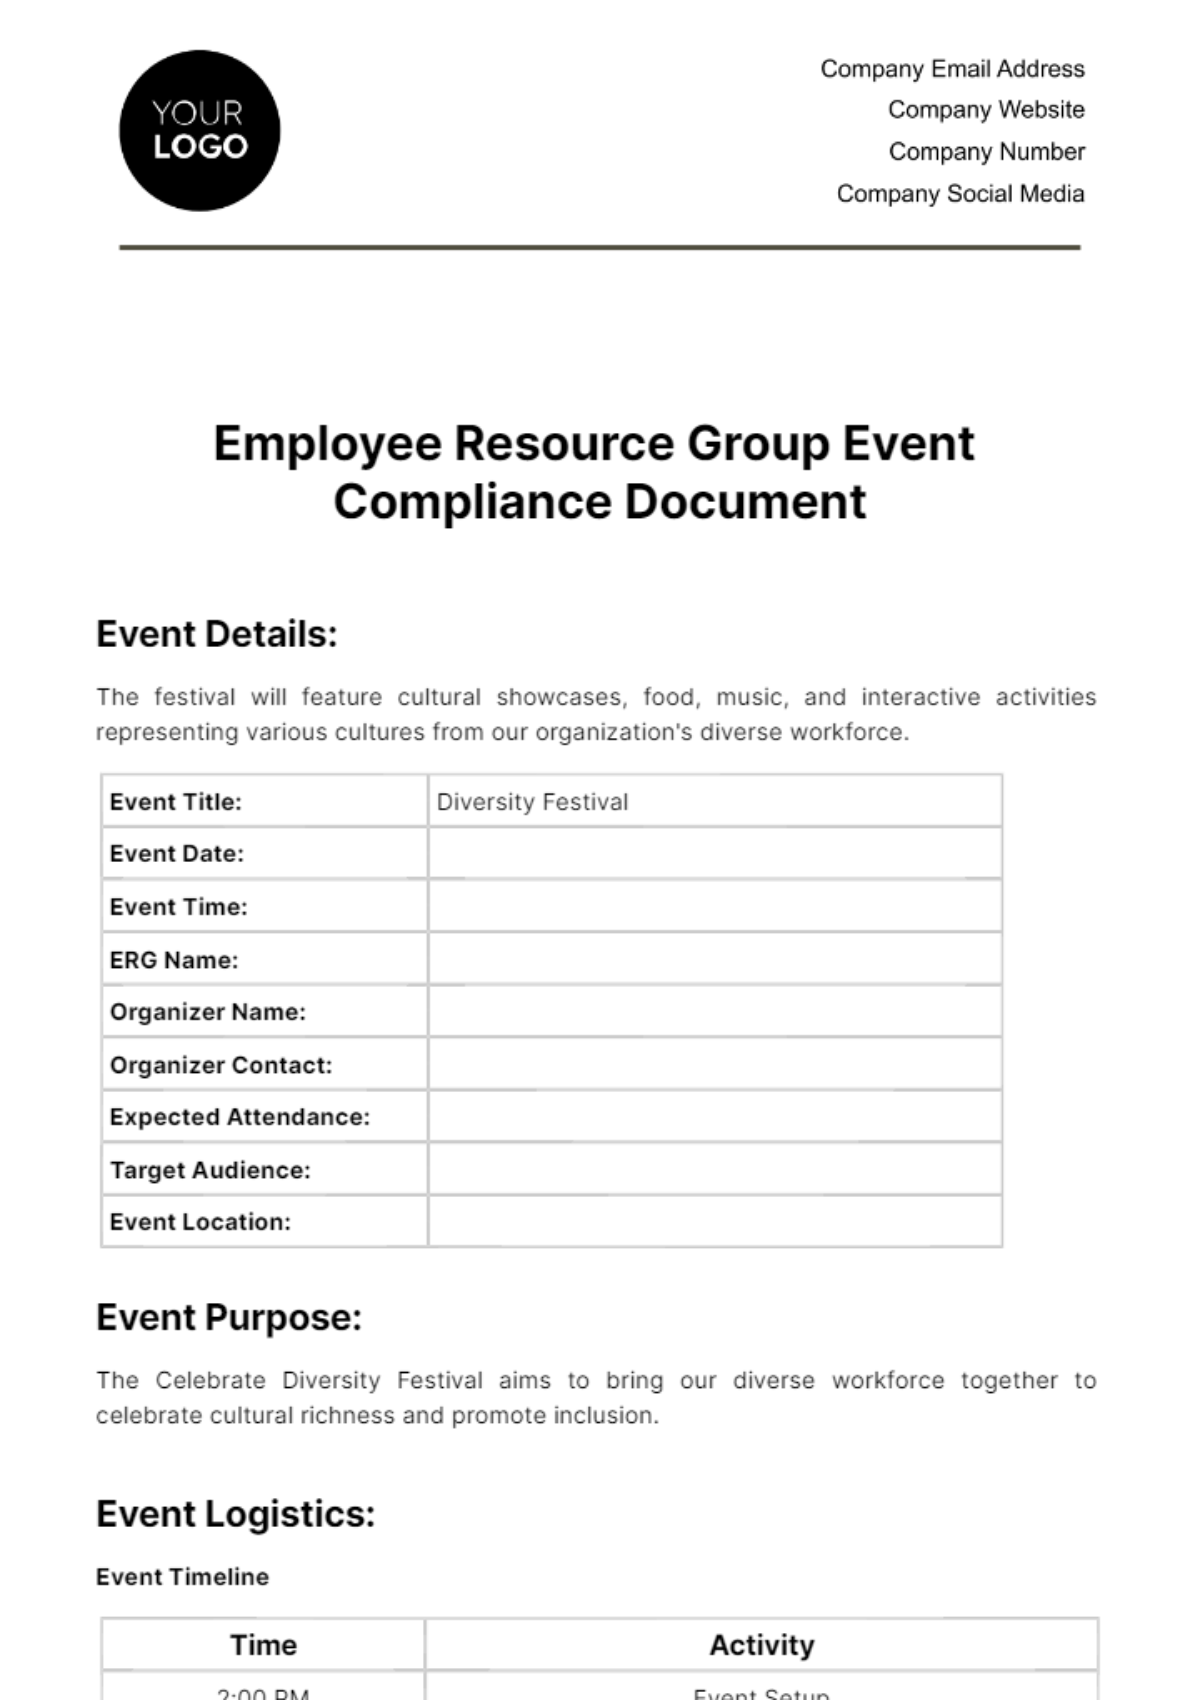 Free Employee Resource Group Event Compliance Document HR Template